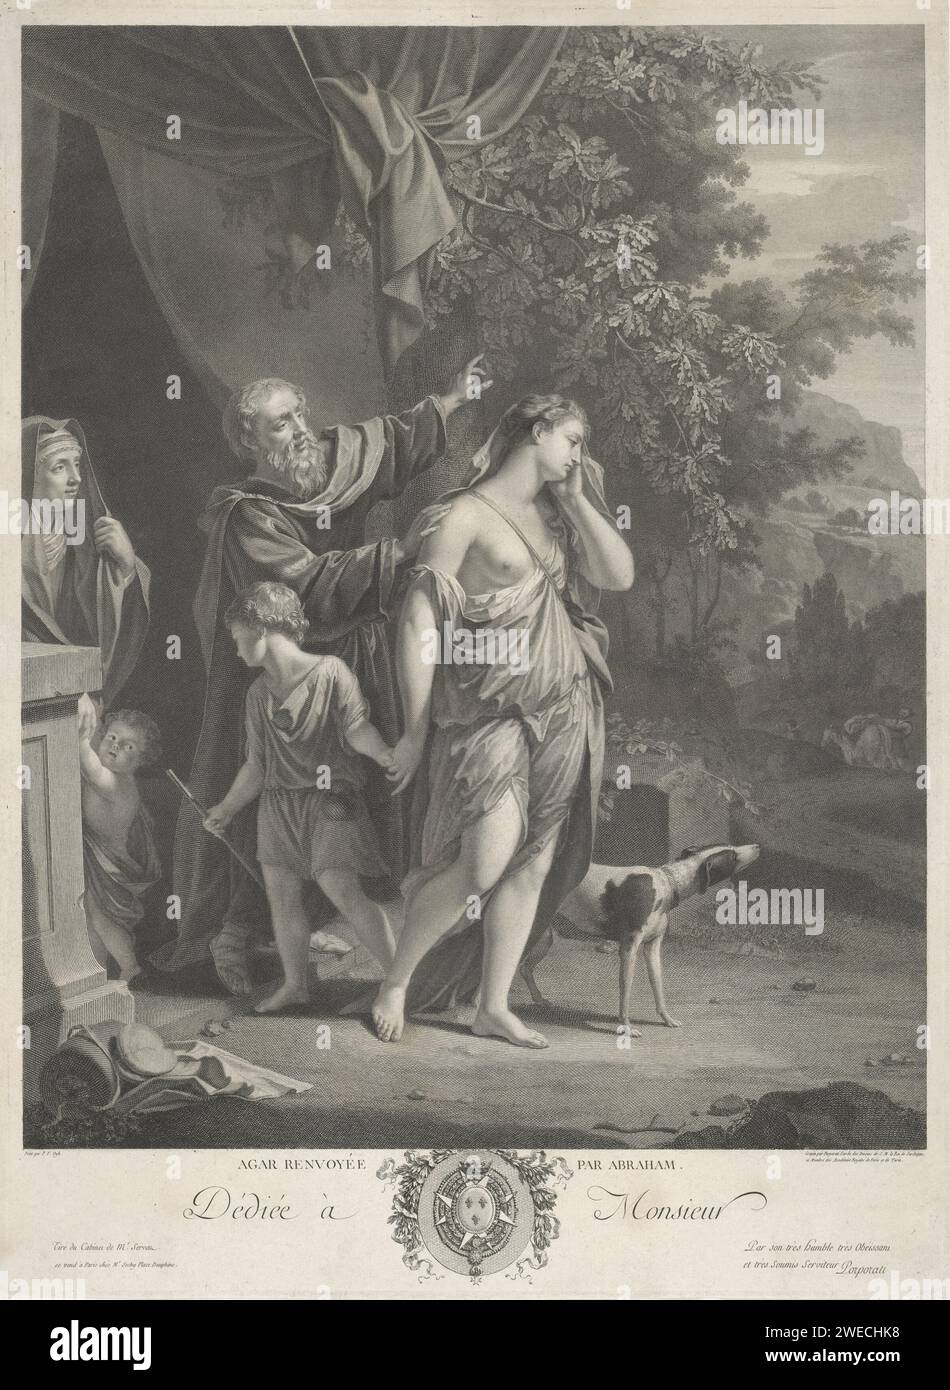 Abraham drives Hagar and Ismaël, Carlo Antonio Porporati, after Philip van Dijk, 1751 - 1816 print Abraham sends Hagar and his first son Ismaël away at the request of his wife Sara. Sara is in the doorway with the youngest son. Italy paper engraving the banishment of Hagar and Ishmael (Genesis 21:9-21) Stock Photo